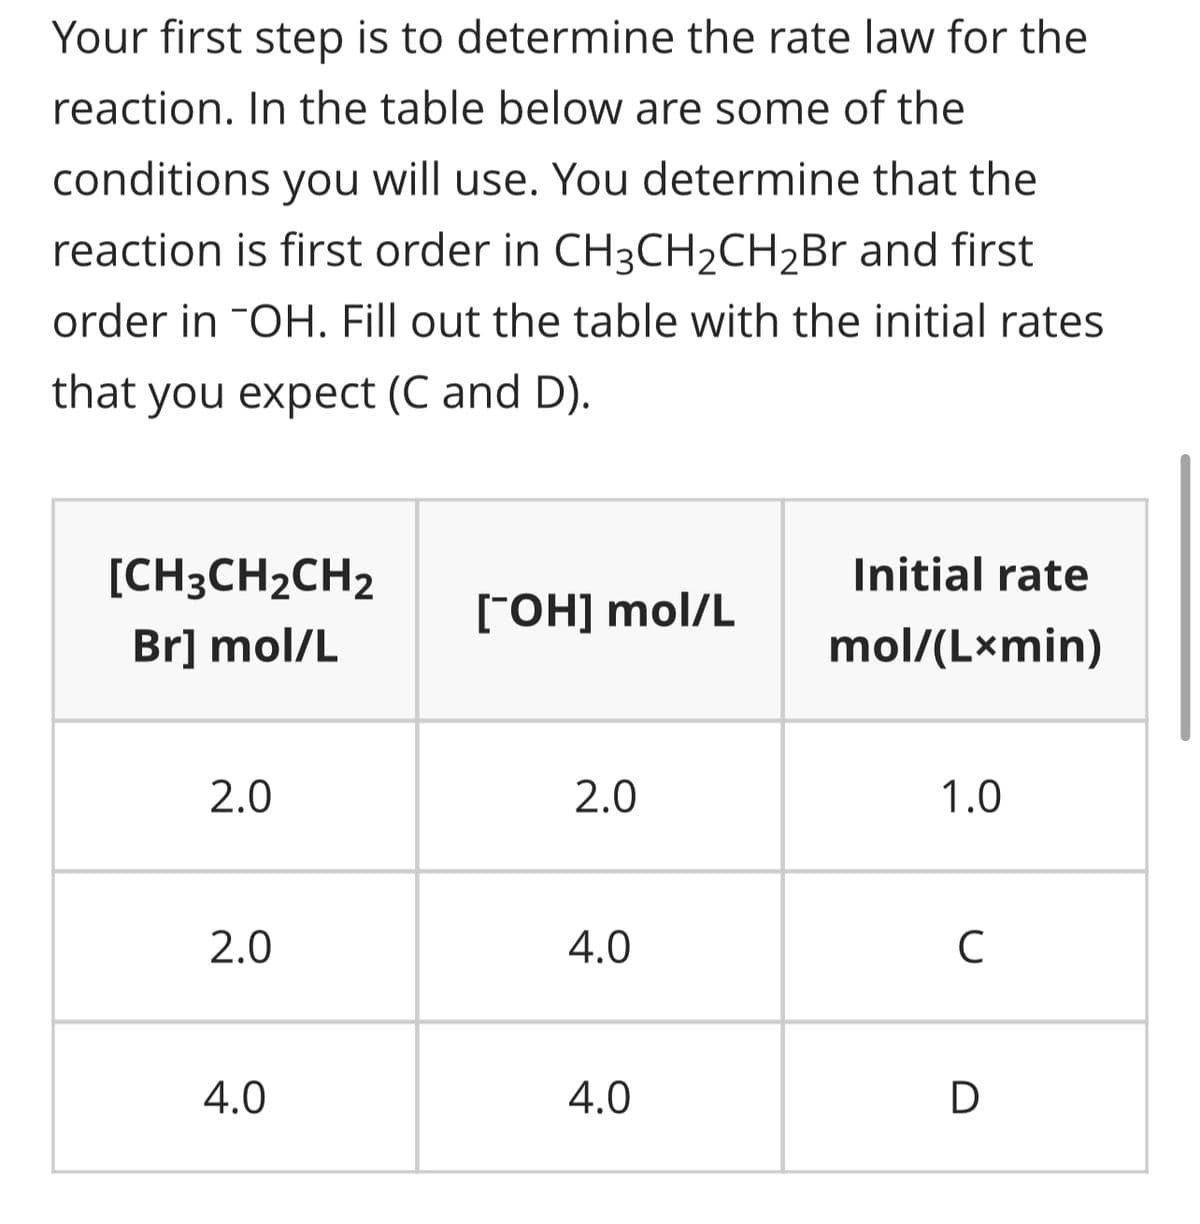 Your first step is to determine the rate law for the
reaction. In the table below are some of the
conditions you will use. You determine that the
reaction is first order in CH3CH₂CH₂Br and first
order in OH. Fill out the table with the initial rates
that you expect (C and D).
[CH3CH₂CH2
Br] mol/L
2.0
2.0
4.0
[-OH] mol/L
2.0
4.0
4.0
Initial rate
mol/(Lxmin)
1.0
с
D